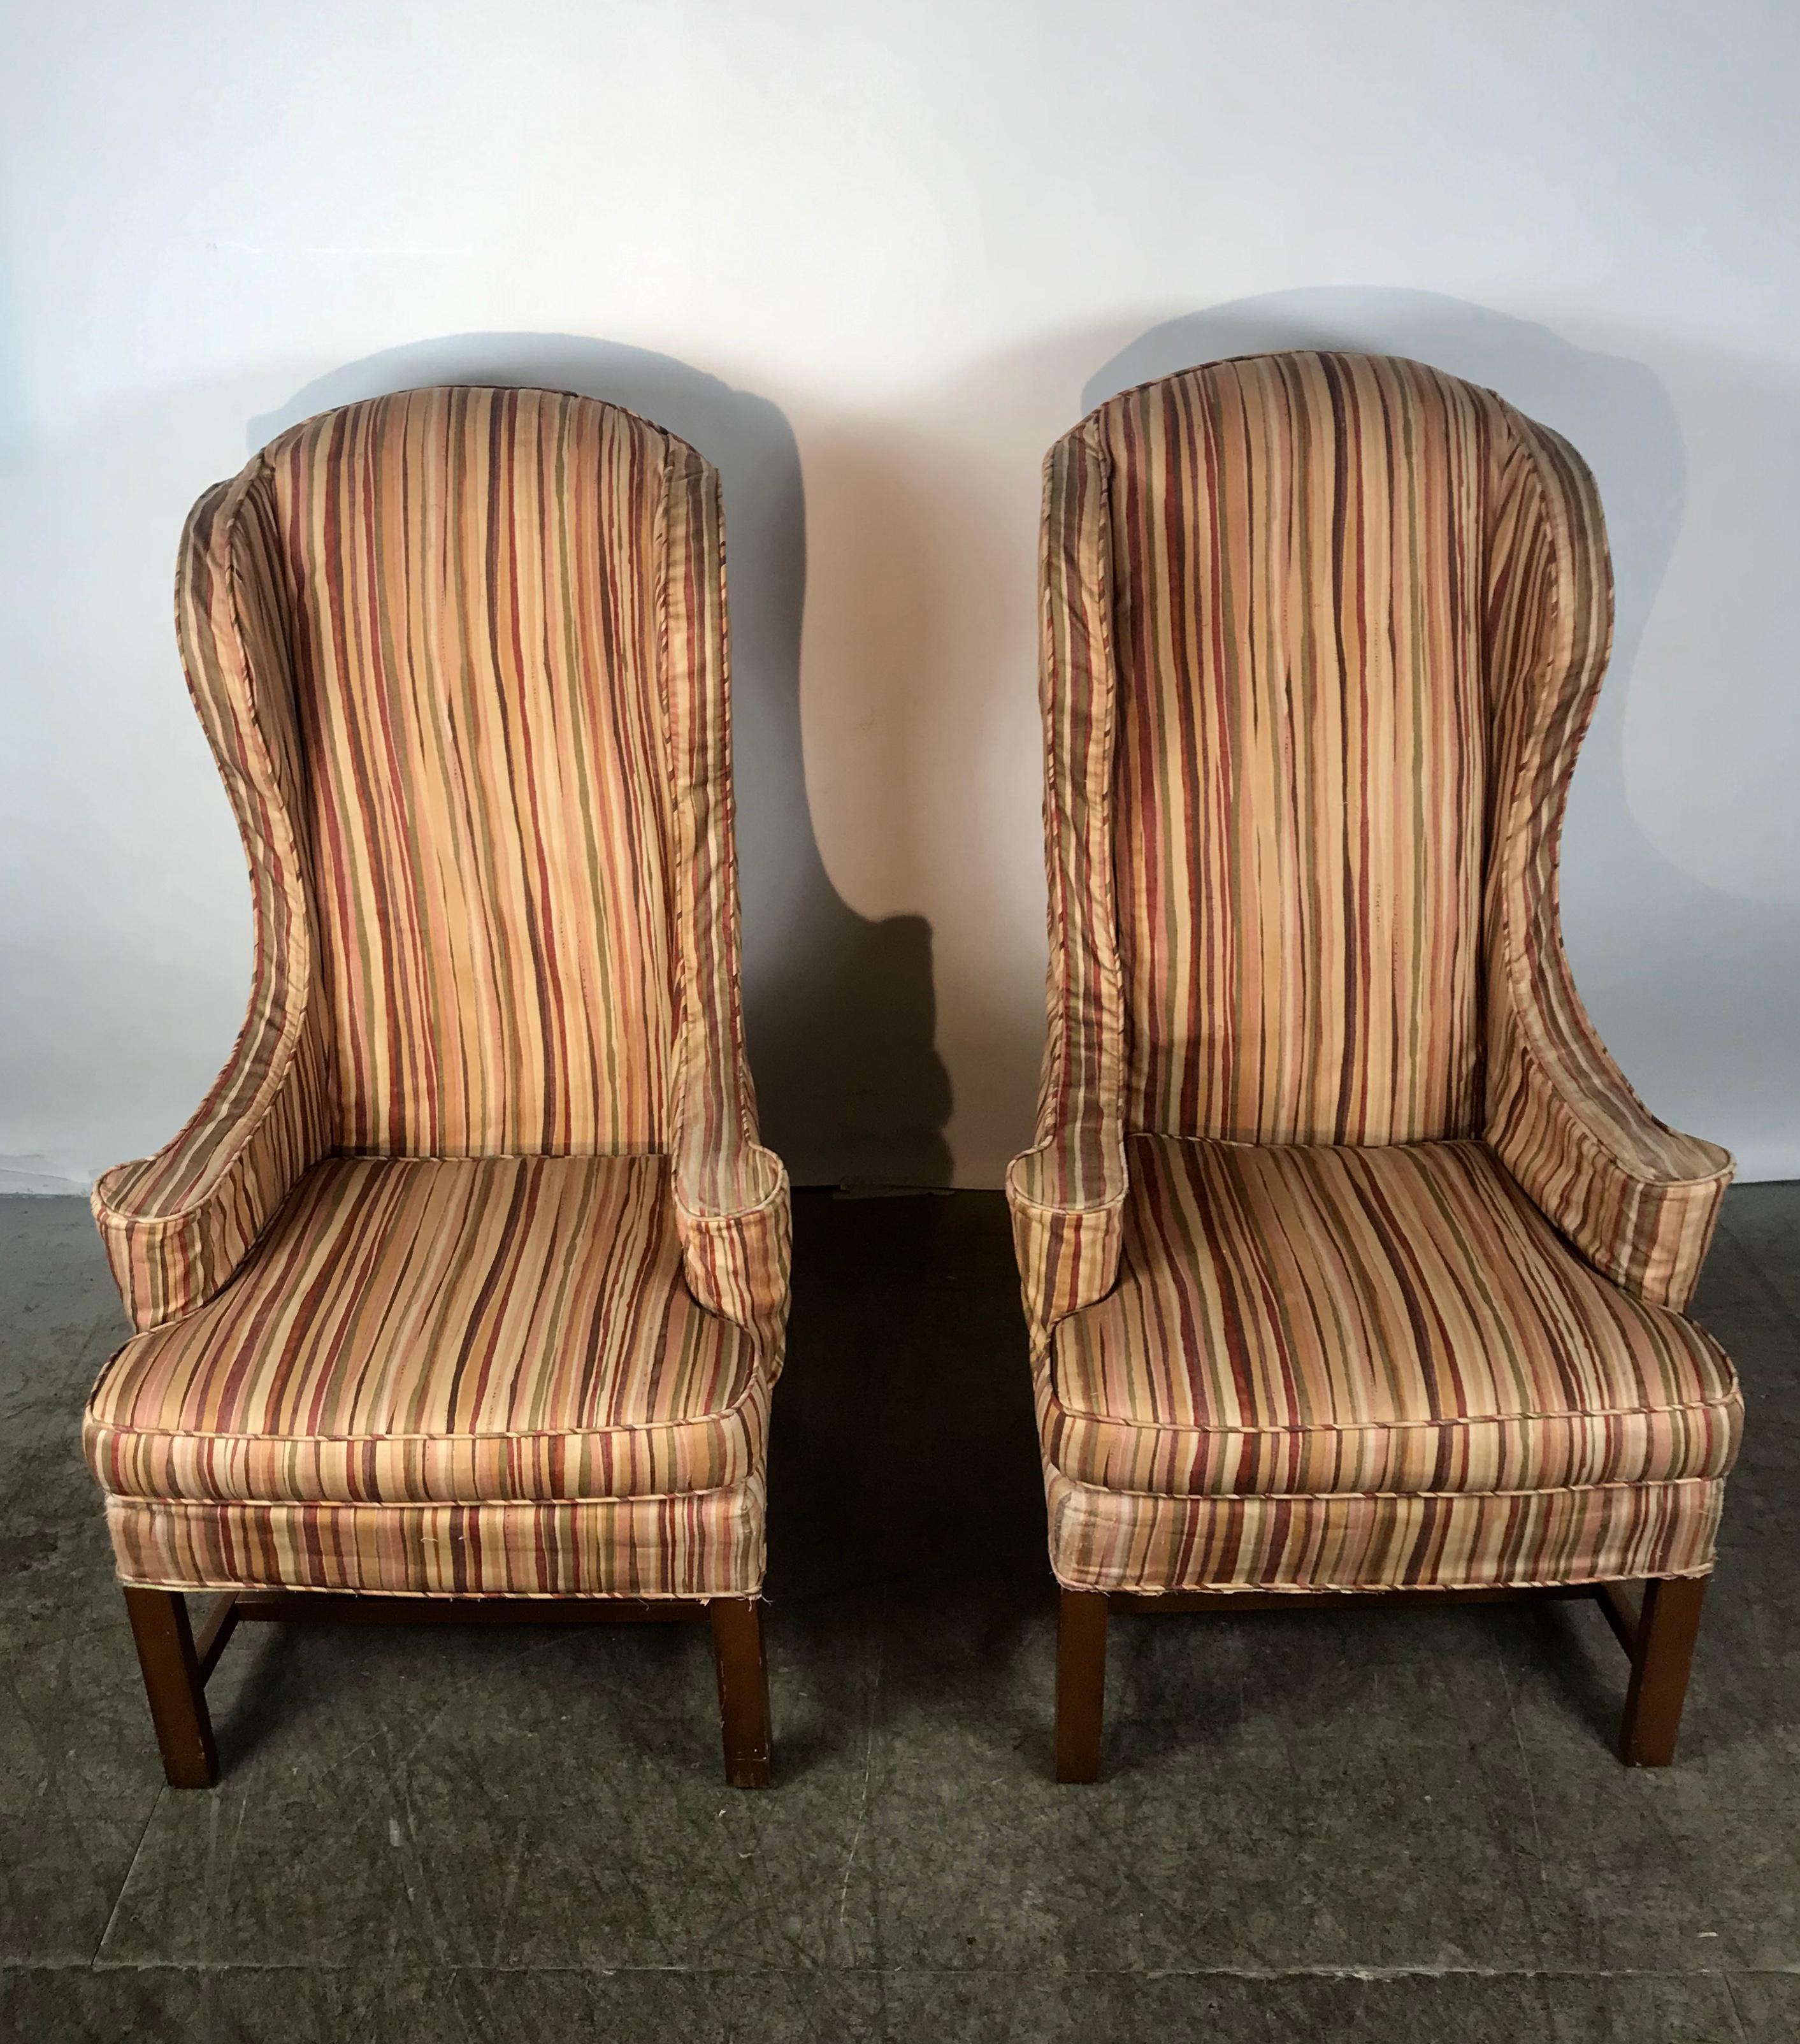 American Classical Dramatic Pair of Wing Back Scroll Arm Chairs Attributed to Kittinger